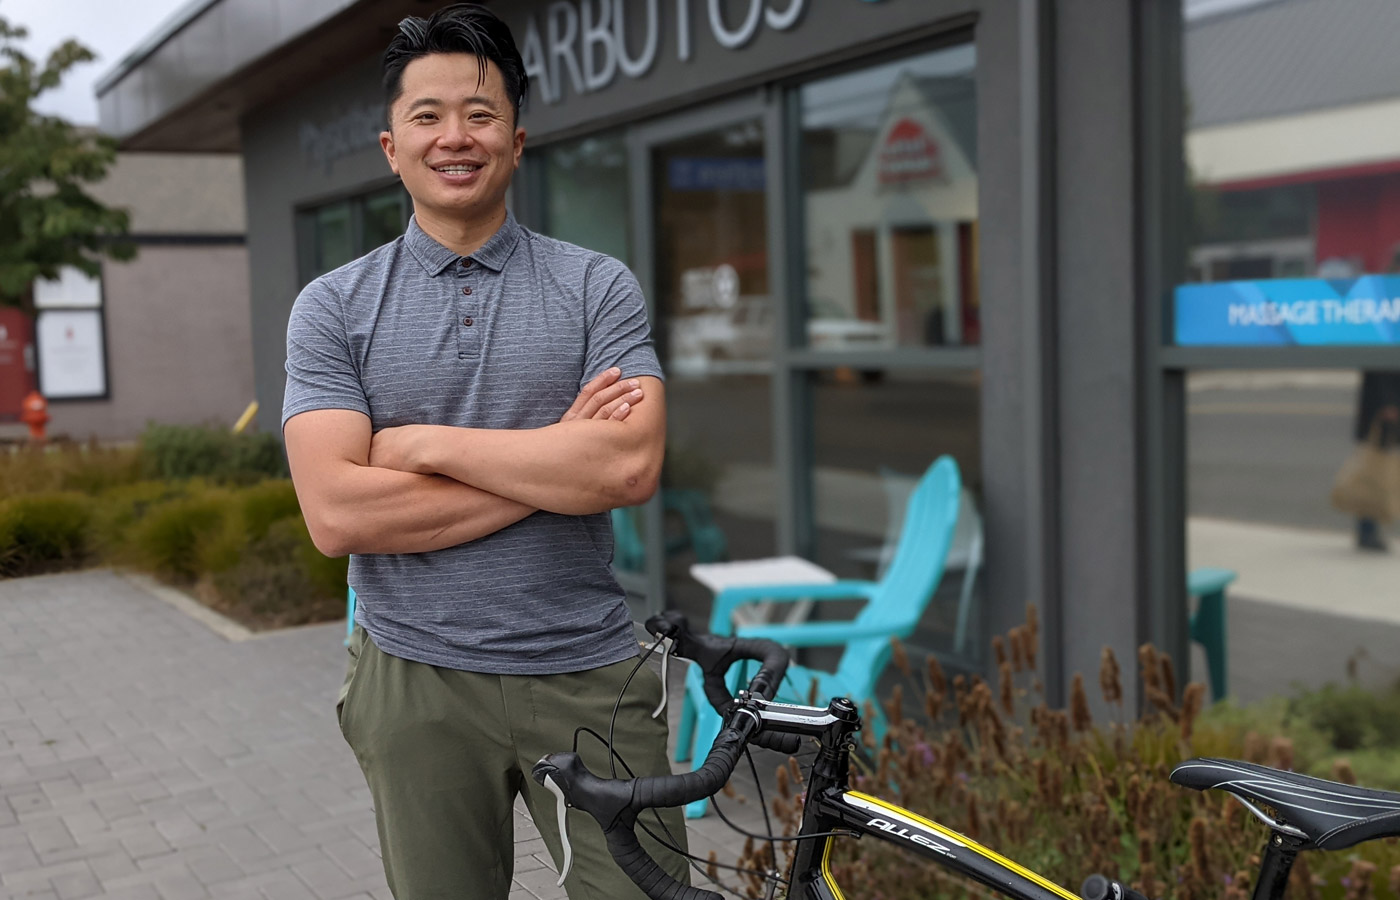 Hockey, physio, and moving to Victoria: Getting to know Thomas Zhou